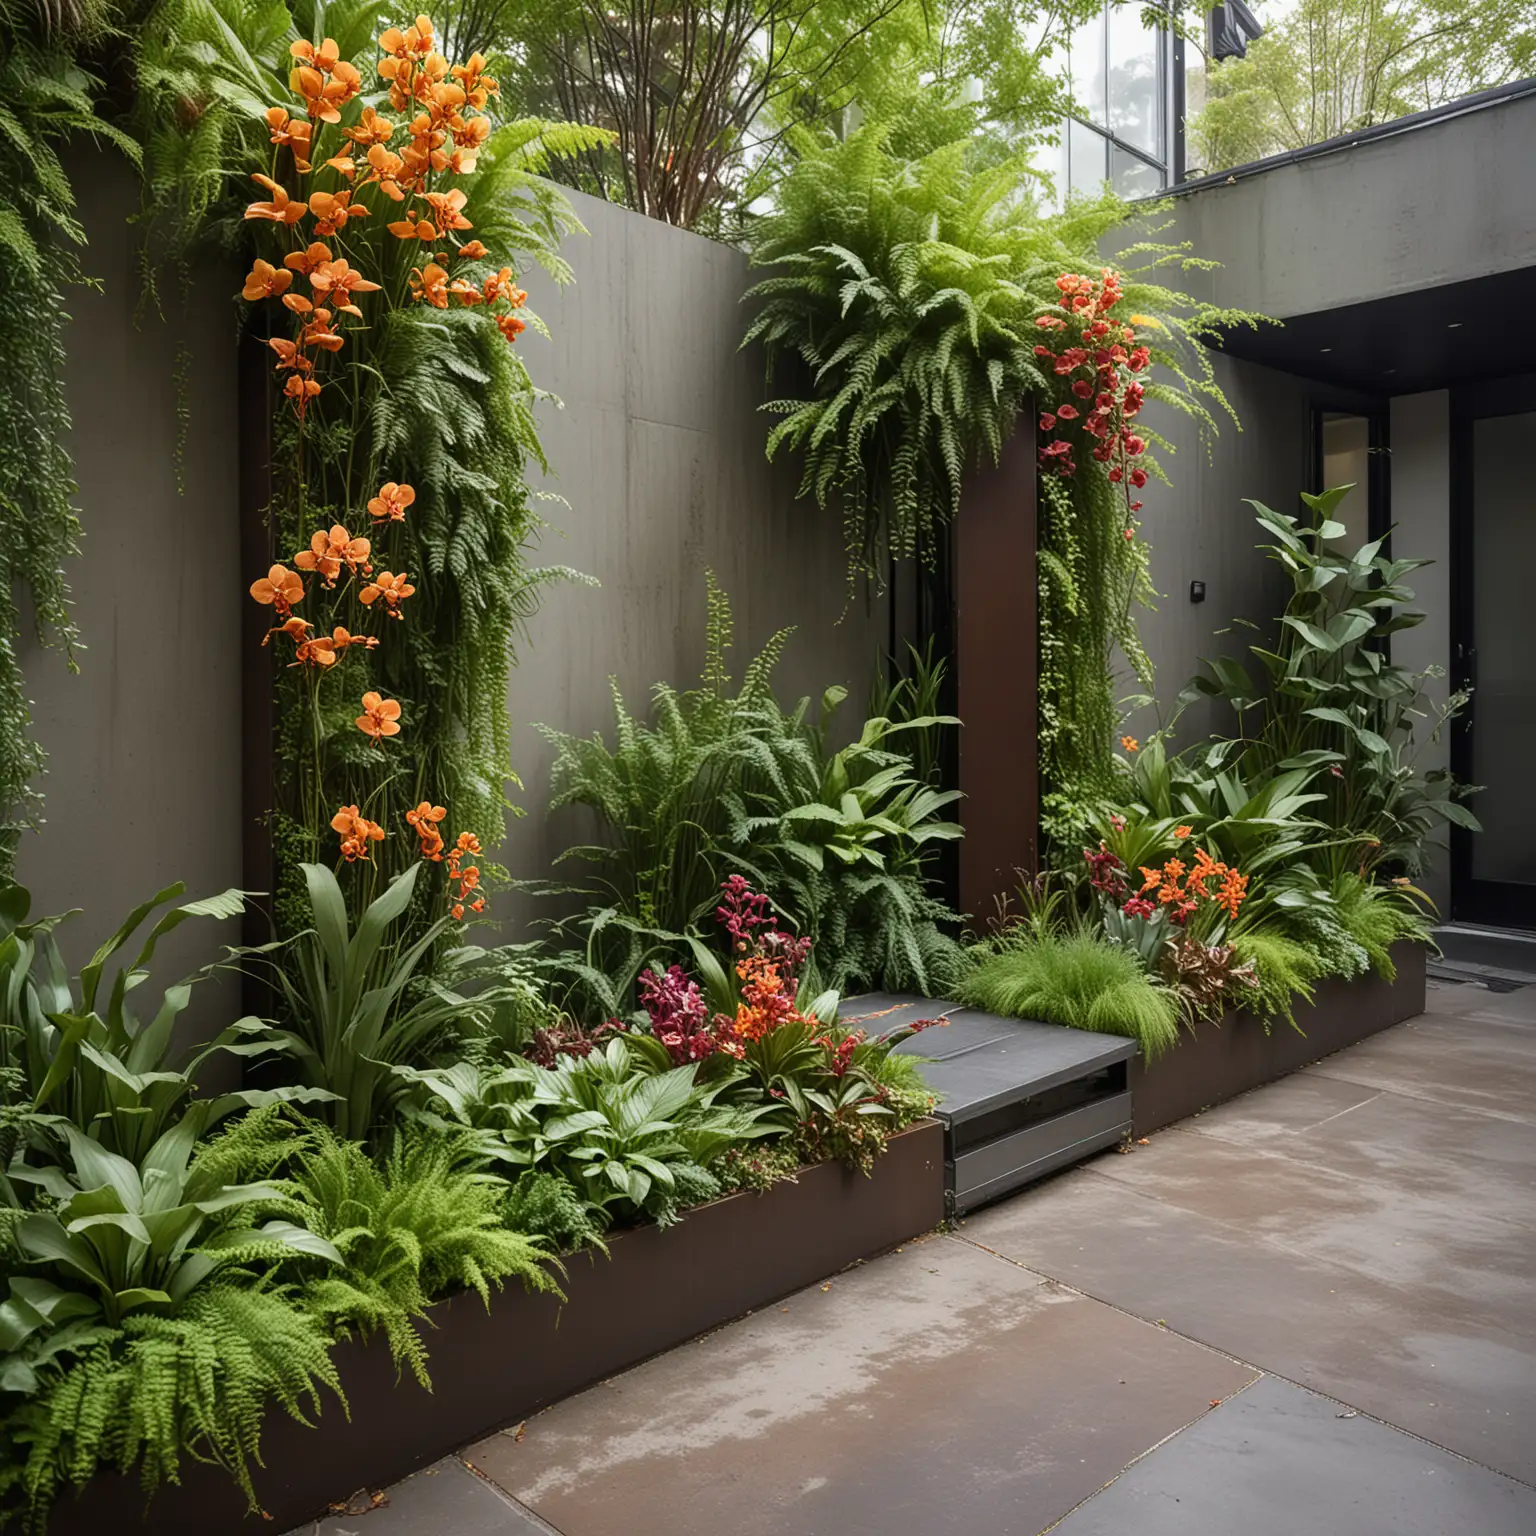 a long shot of a a modern urban garden with vertical gardens filled with ferns, ivy, and colorful orchids. Use corten steel planters and a series of cascading water features for a dramatic effect. Include a sleek, modern gate made of metal and glass at the entrance. The garden also features a compact container house with an expansive rooftop garden, offering panoramic views of the city. This garden is set on a misty spring morning, with the greenery and flowers adding a touch of nature to the urban landscape, highlighted by soft, ambient lighting.